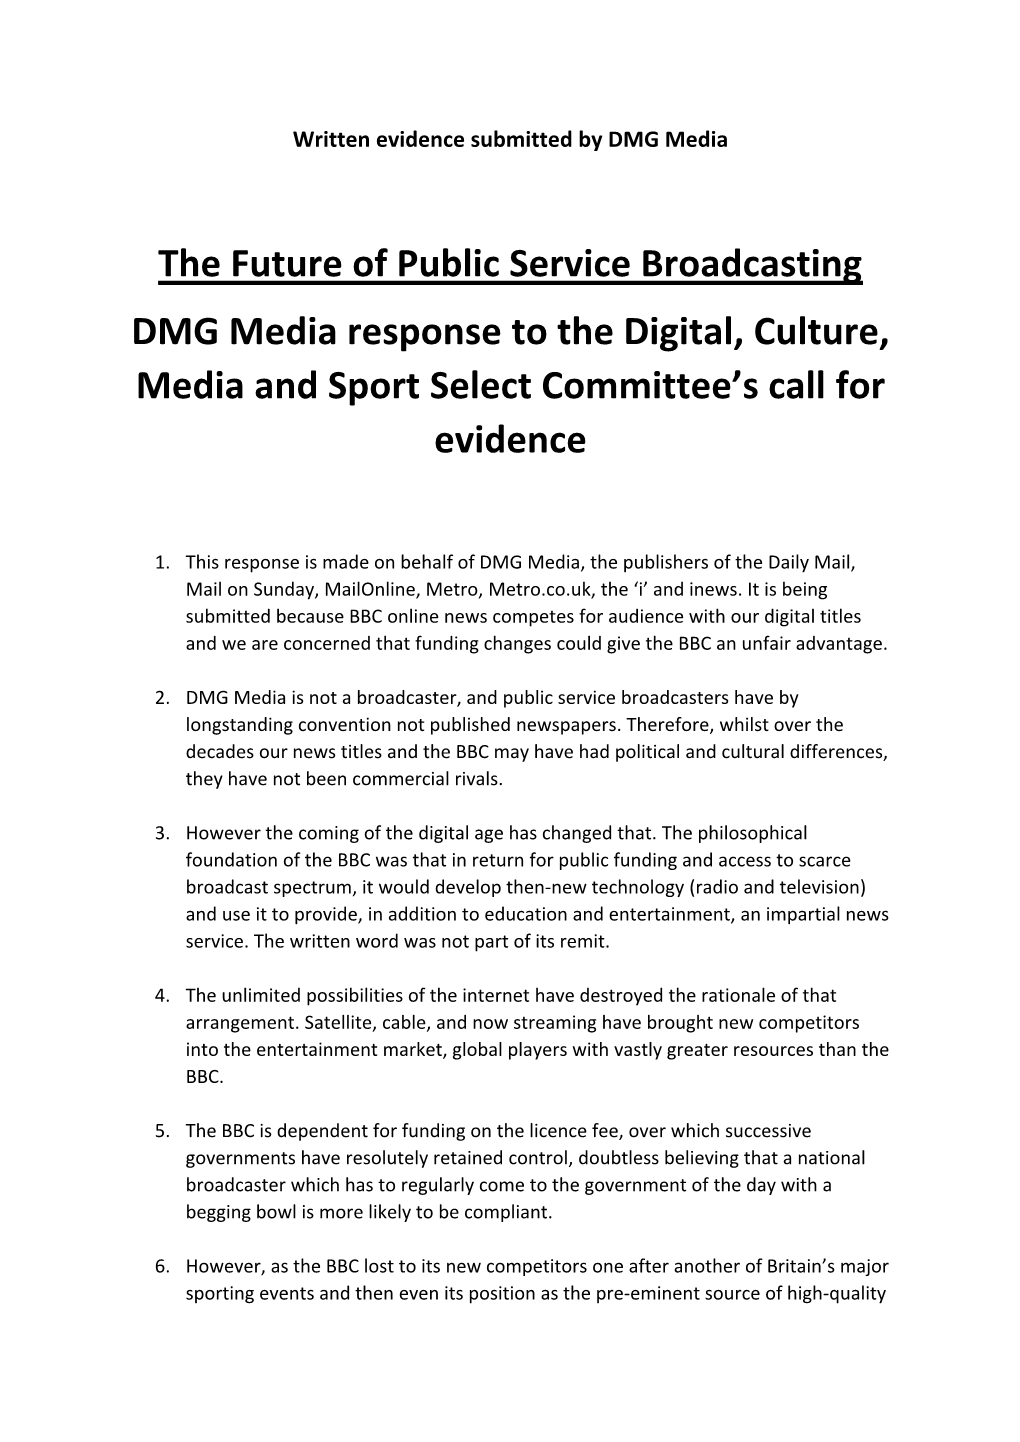 The Future of Public Service Broadcasting DMG Media Response to the Digital, Culture, Media and Sport Select Committee's Call